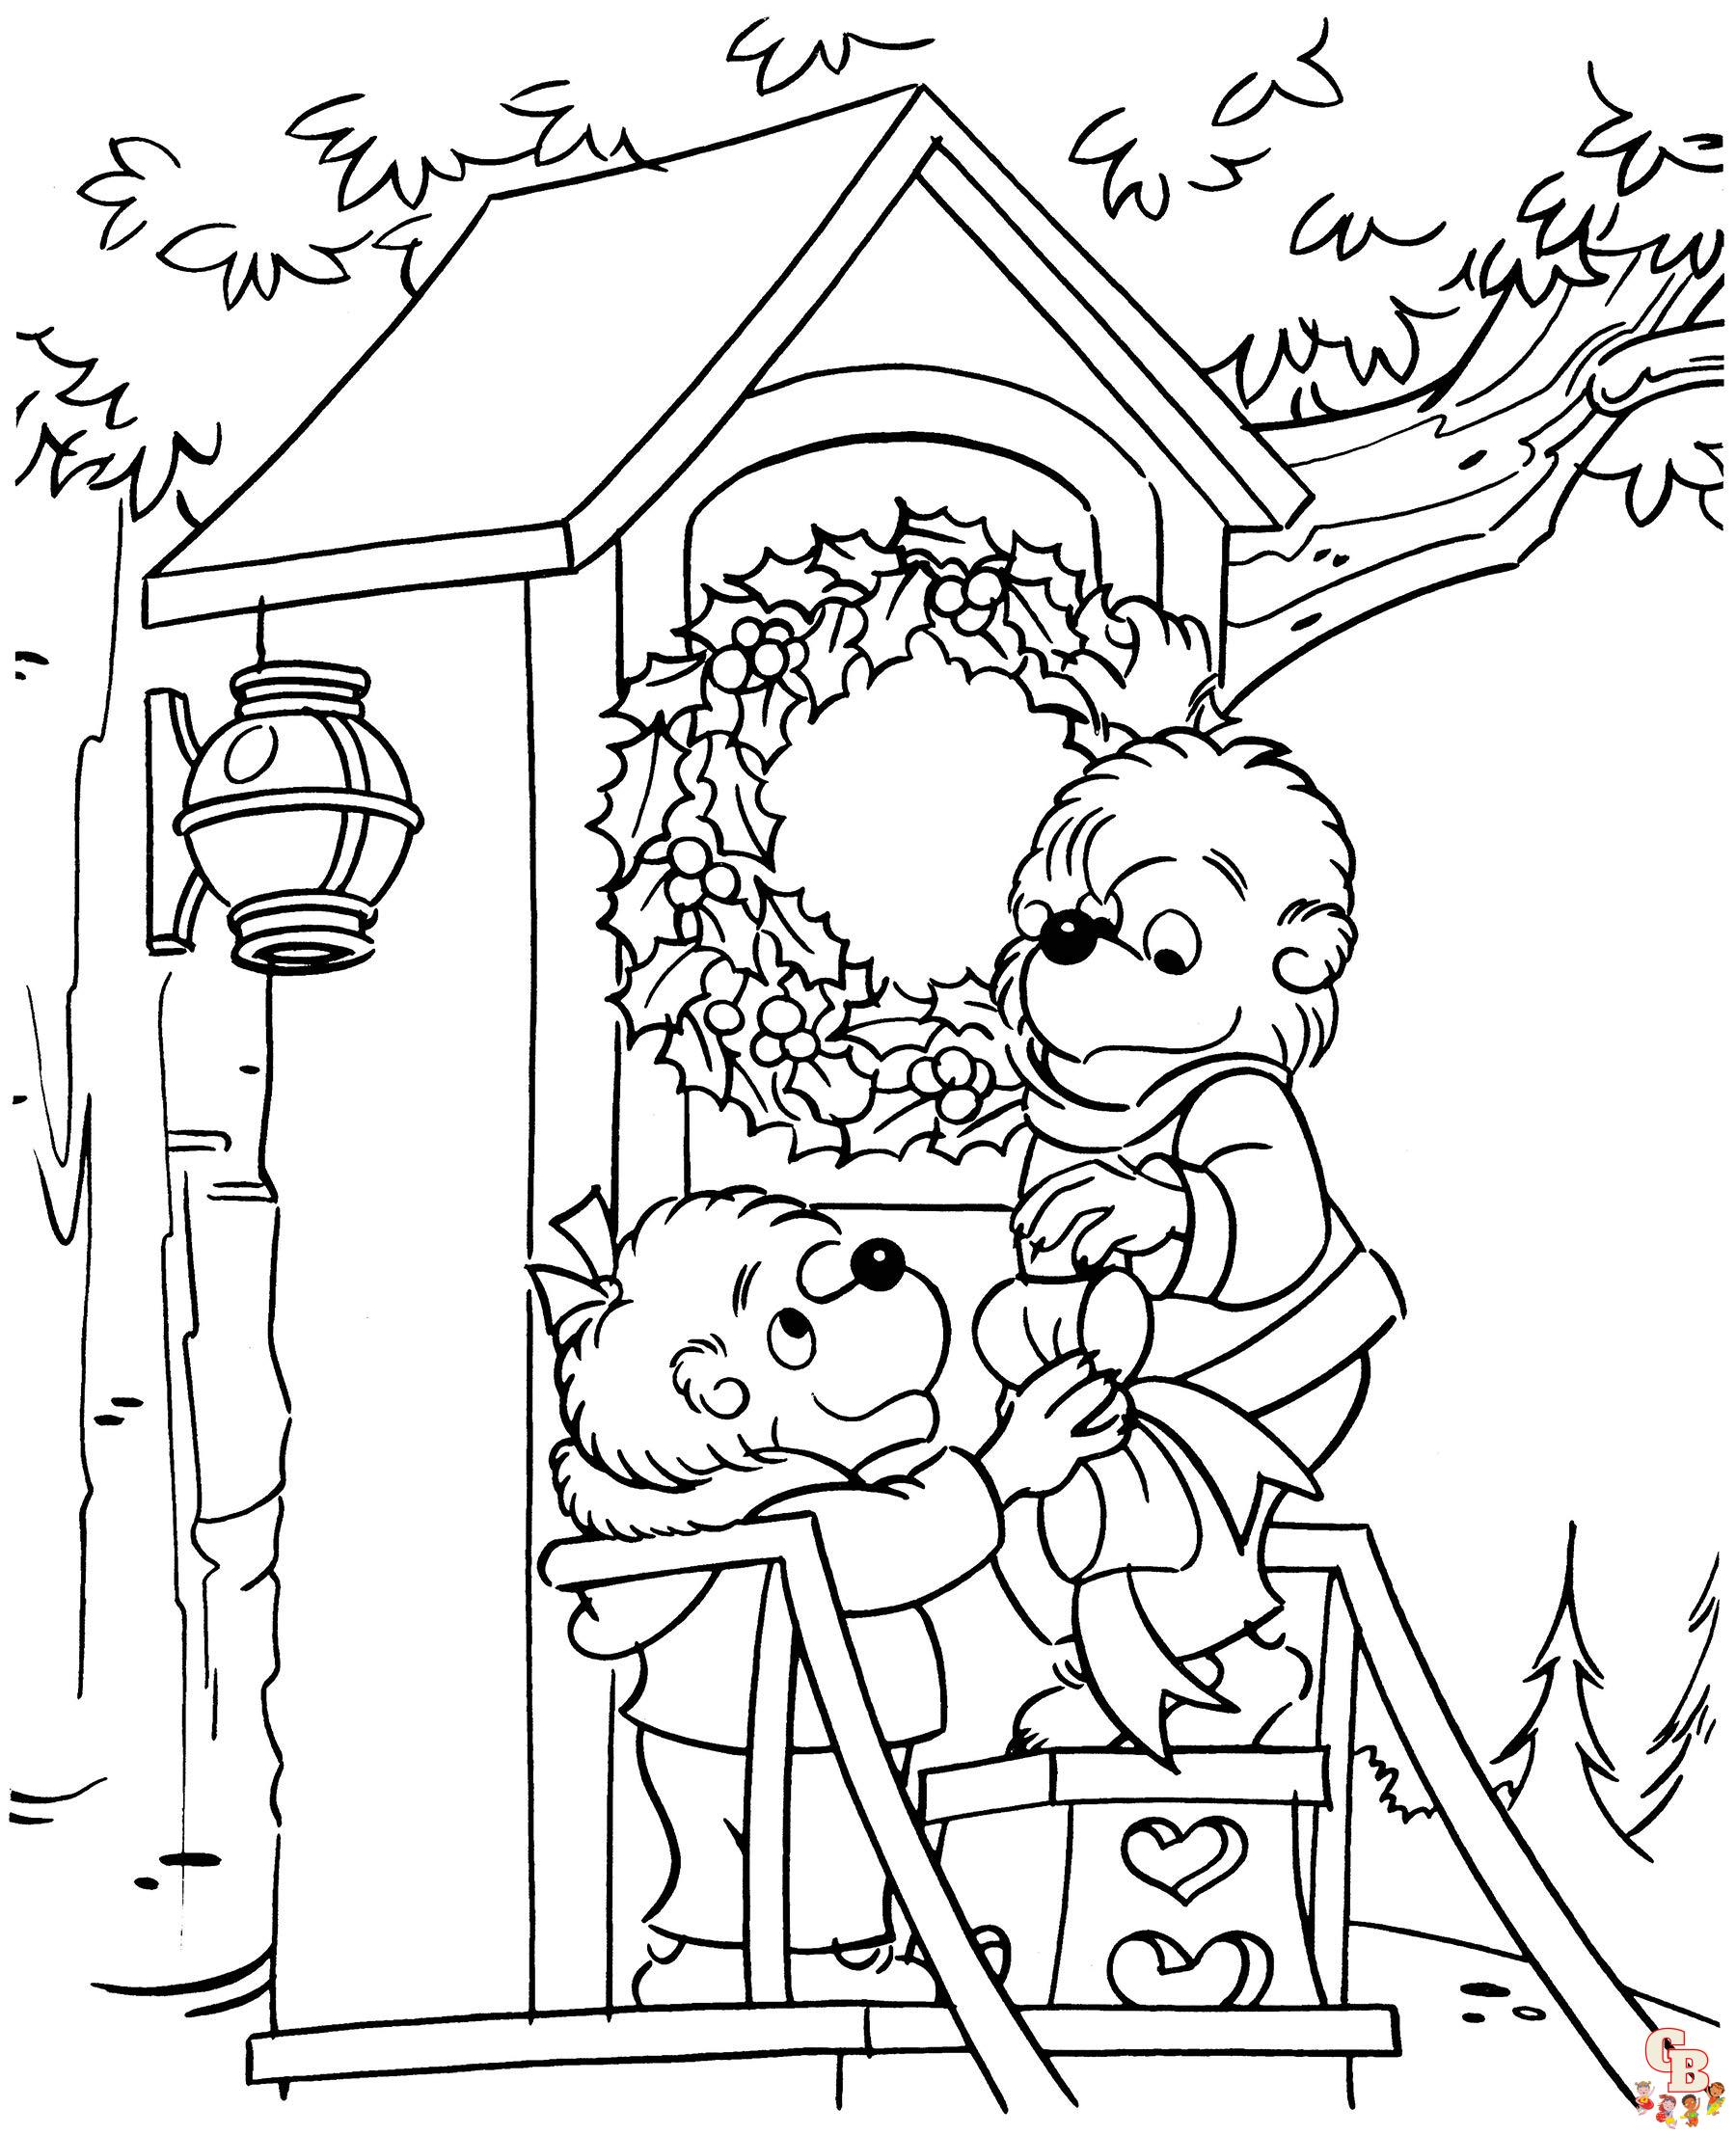 Berenstain Bears Coloring Pages 2